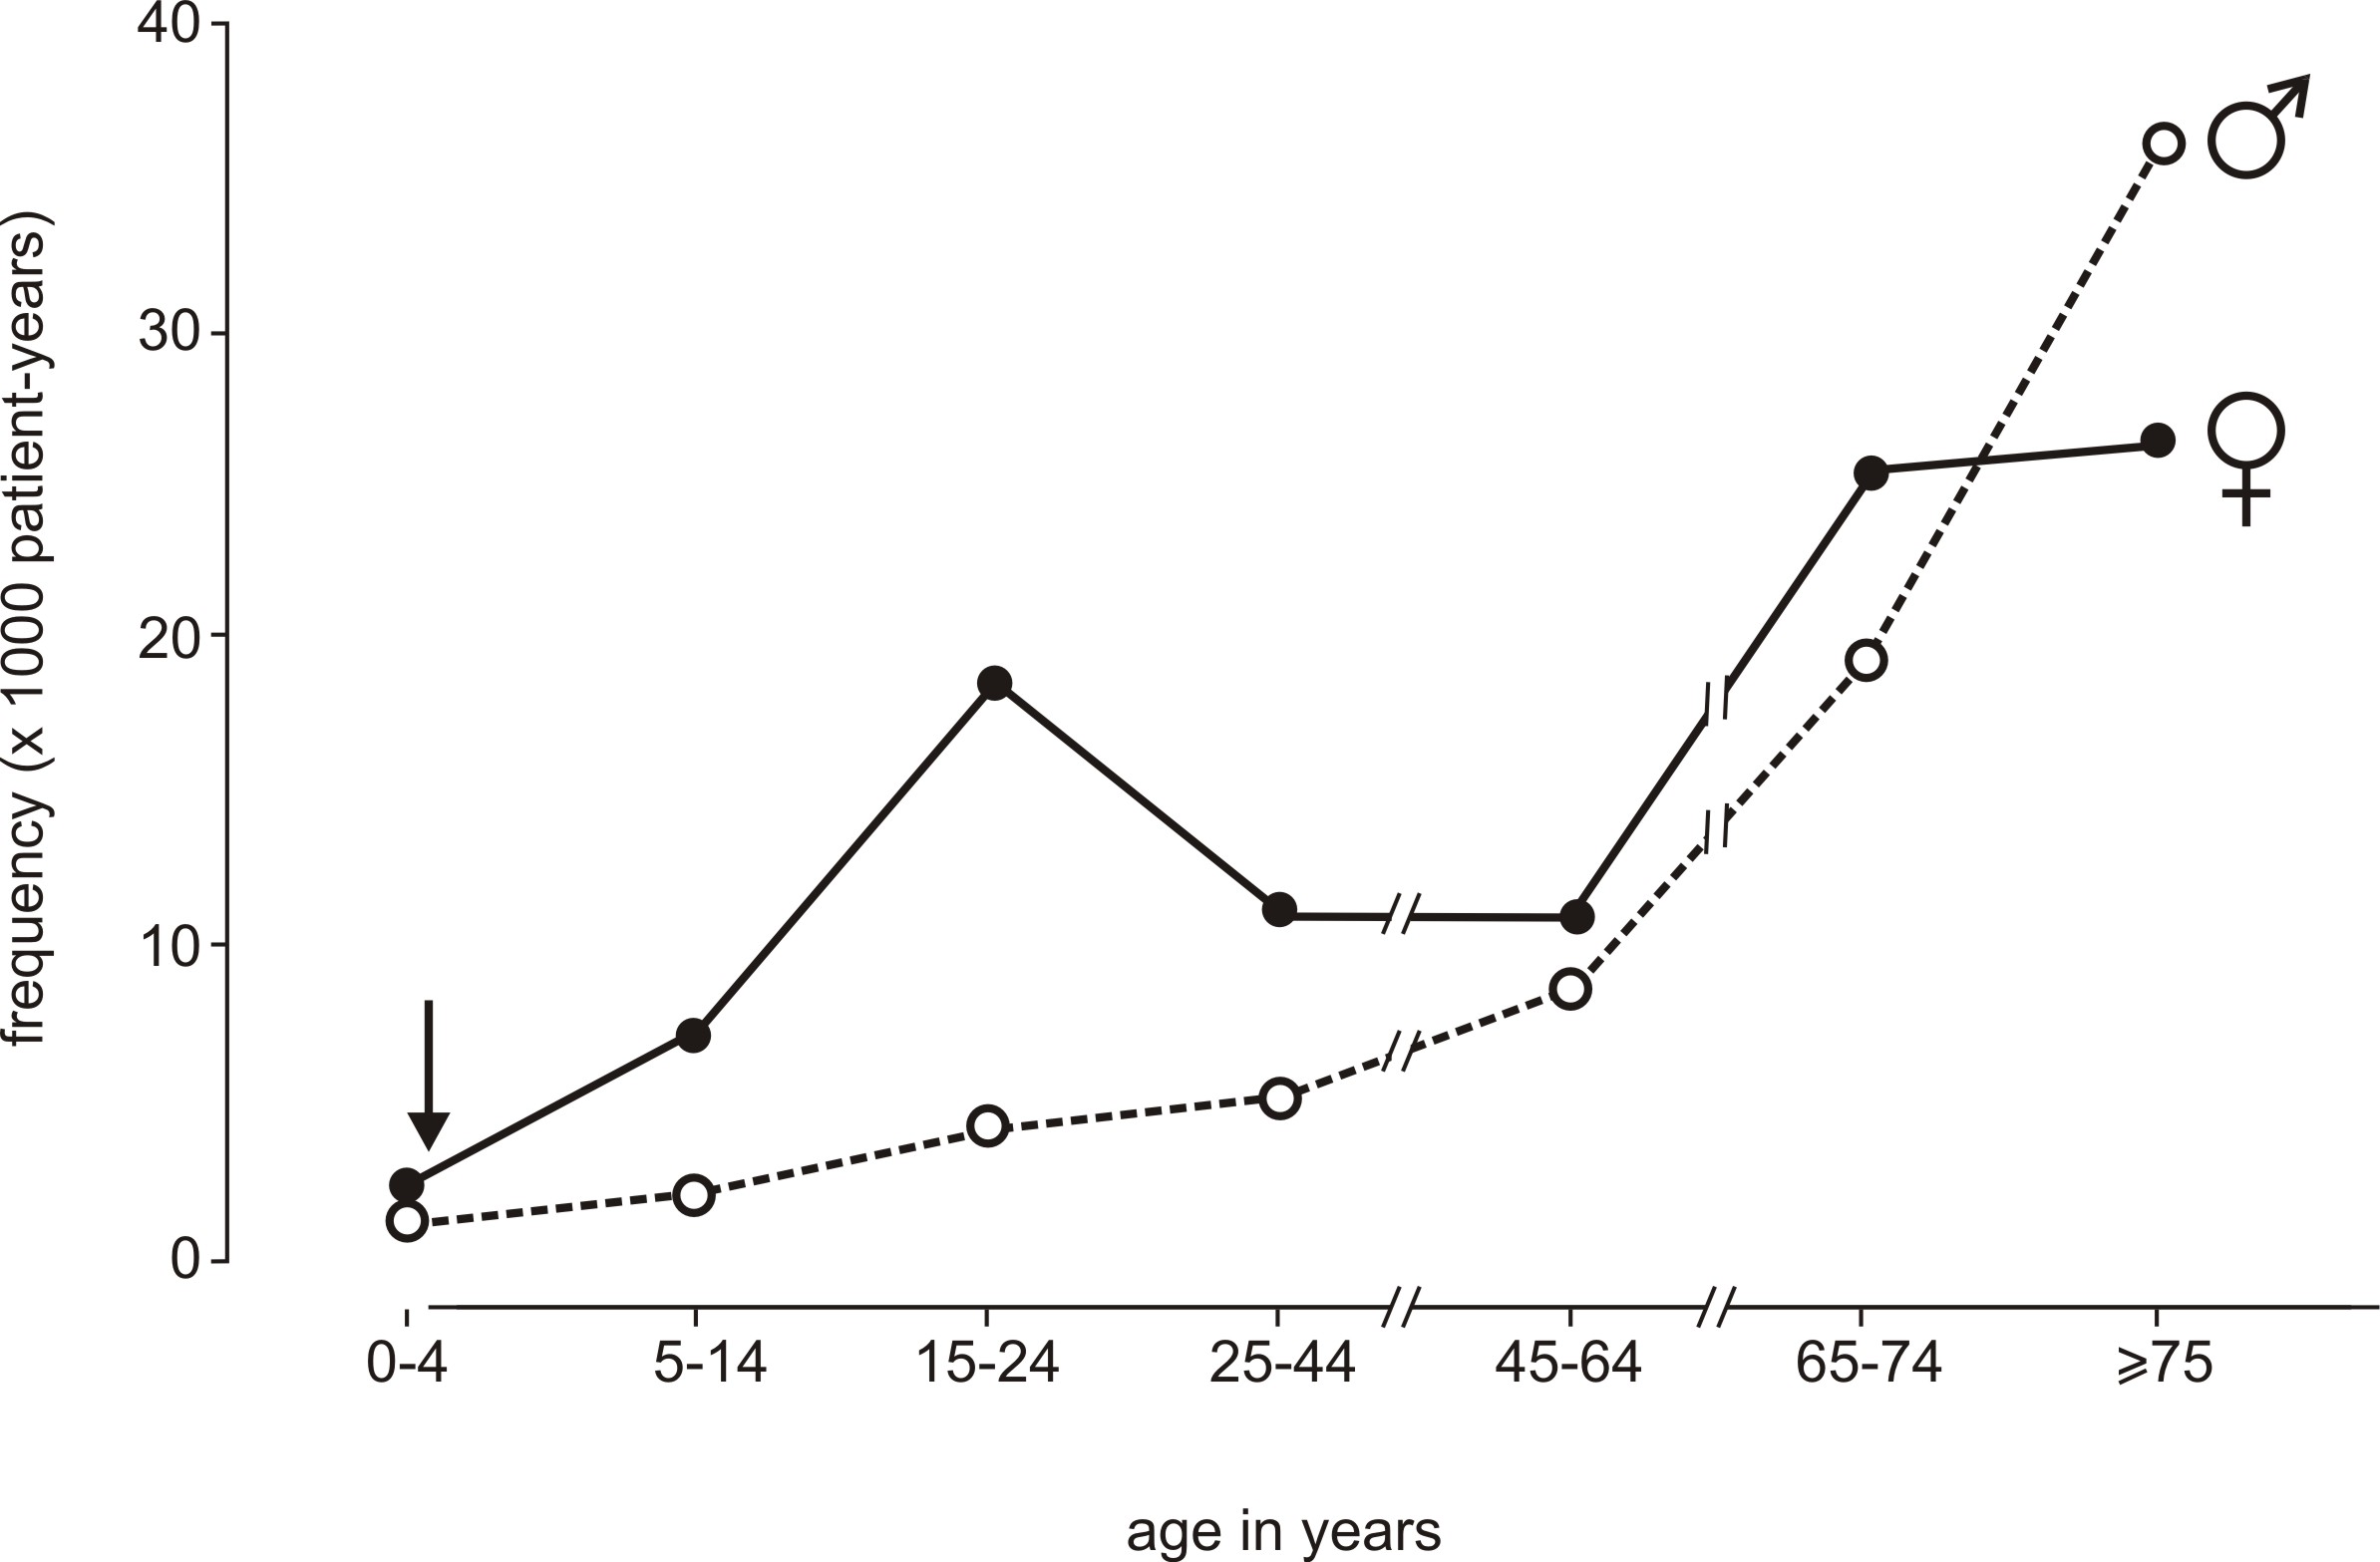 Frequency of the complaint fainting as reason for encounter in general practice in the Netherlands. Data are obtained from the general practitioners transition project. It concerns an analysis of 93.297 patient years. The arrow around 1 year is to indicate that a small peak occurs between 6-18 months (breath-holding spells). [From Colman et al reference 7 with permission]